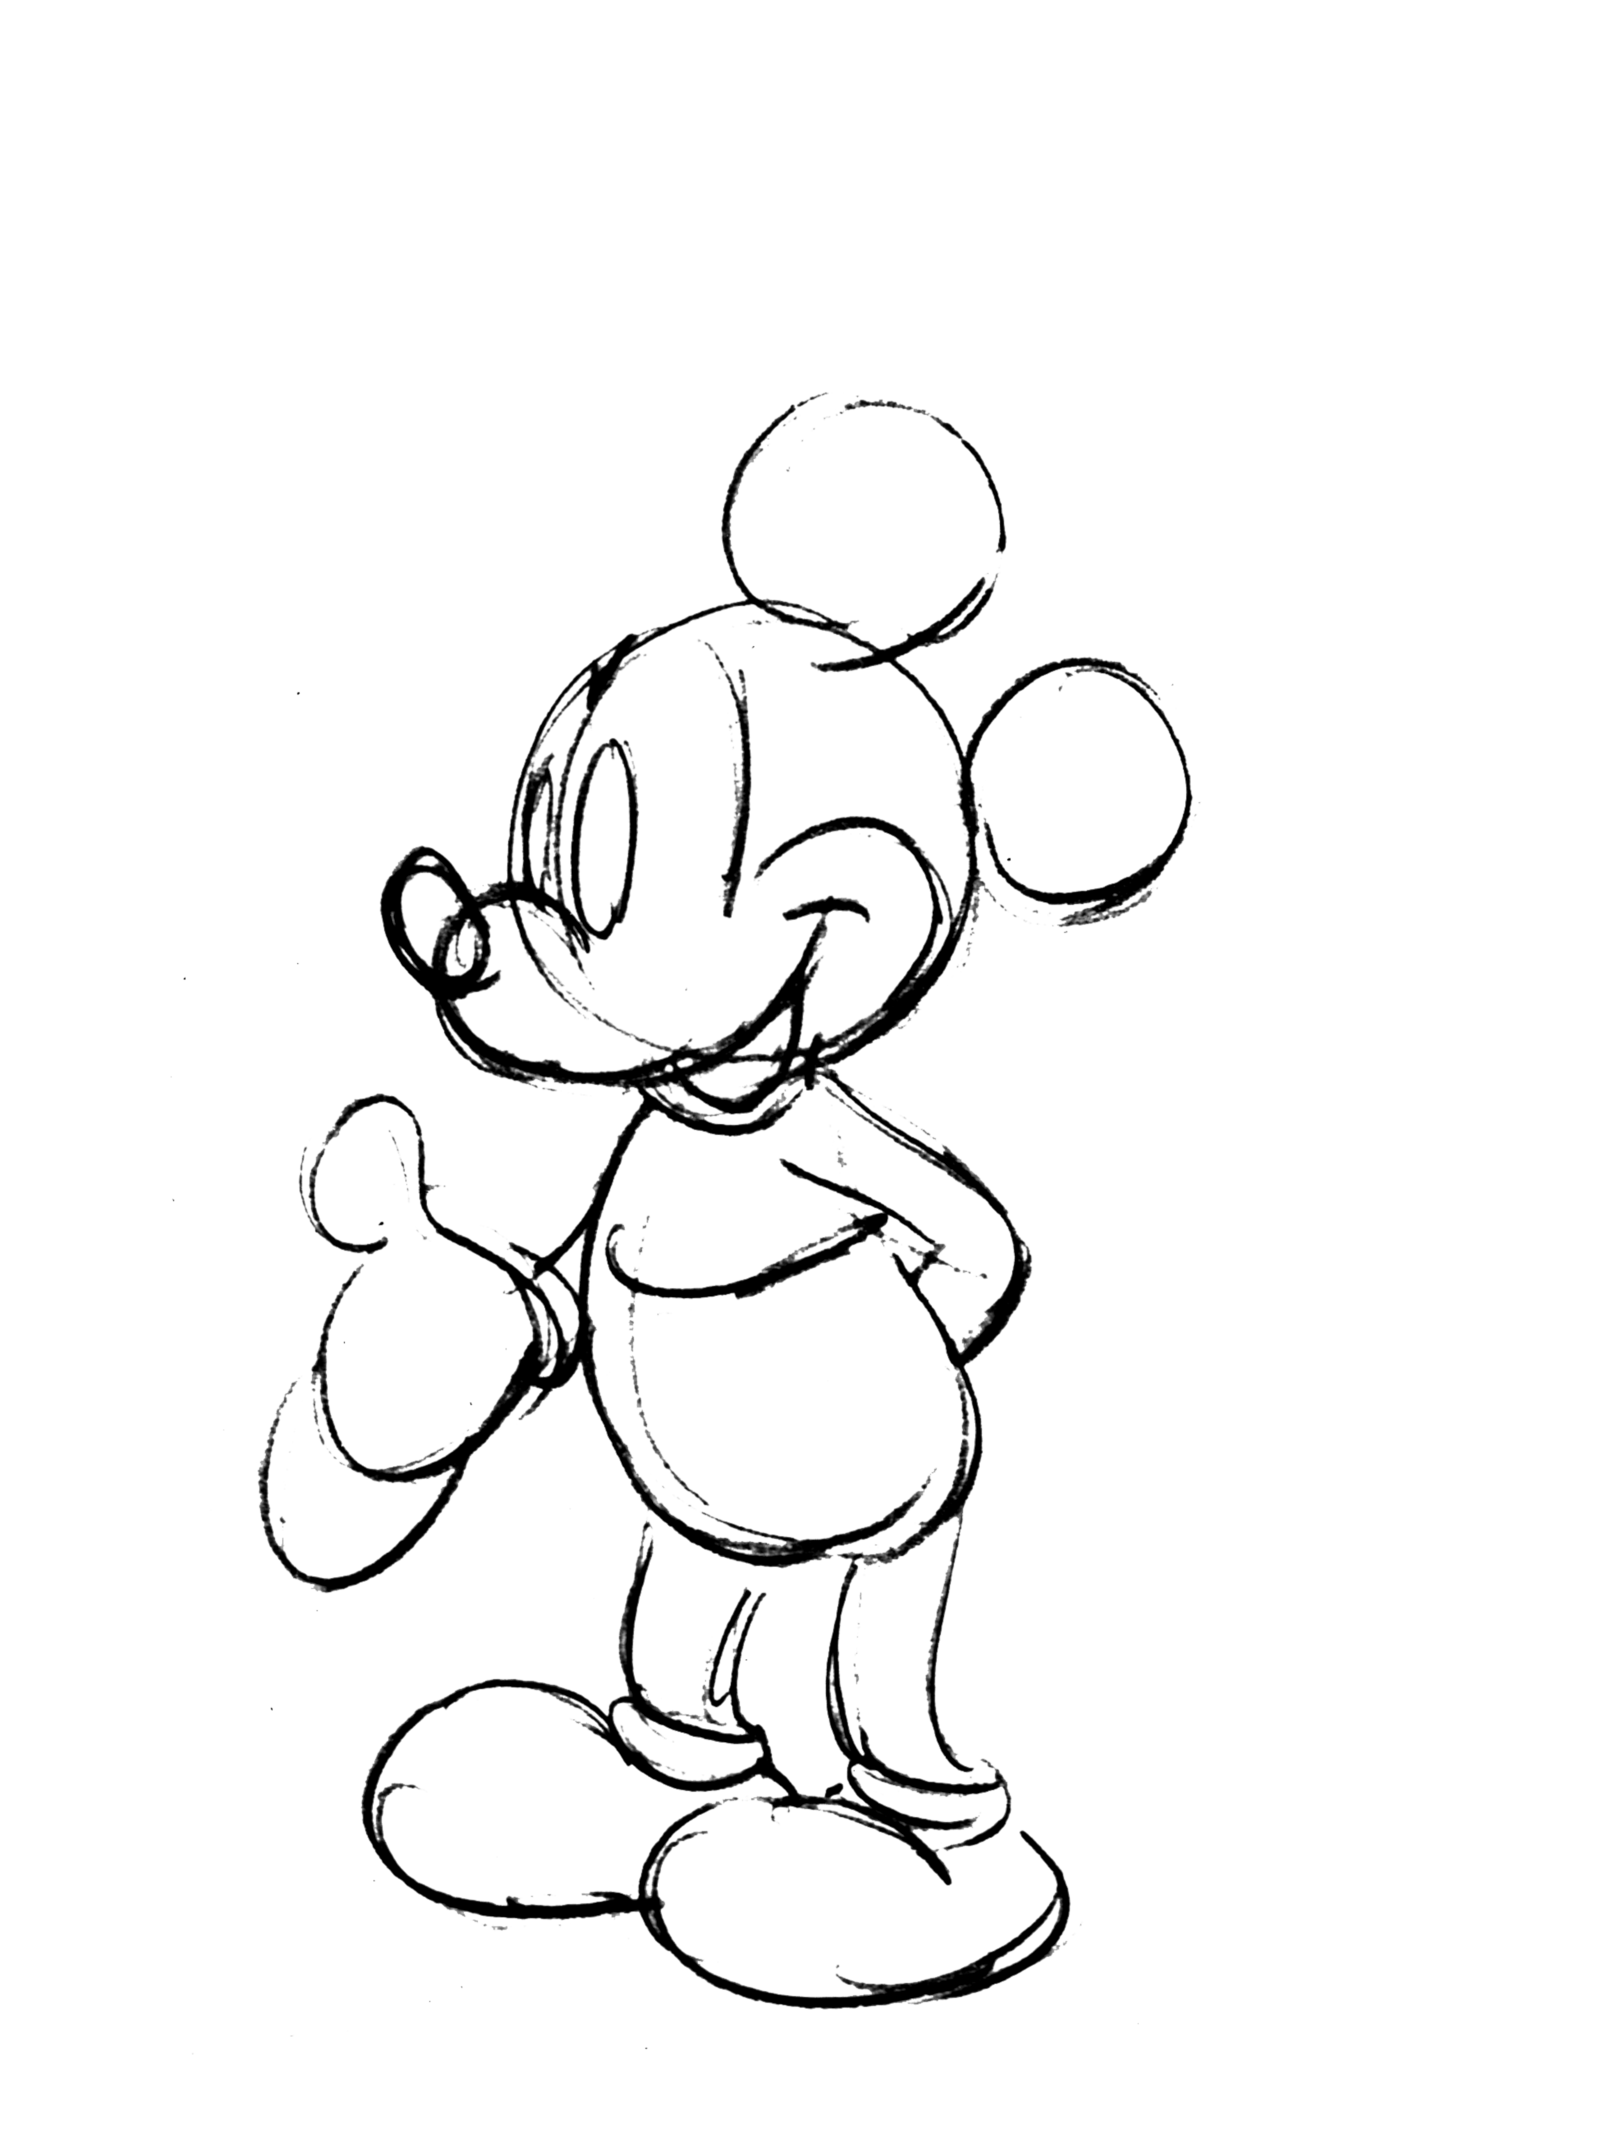 Animated gif of a sketch of Mickey Mouse.